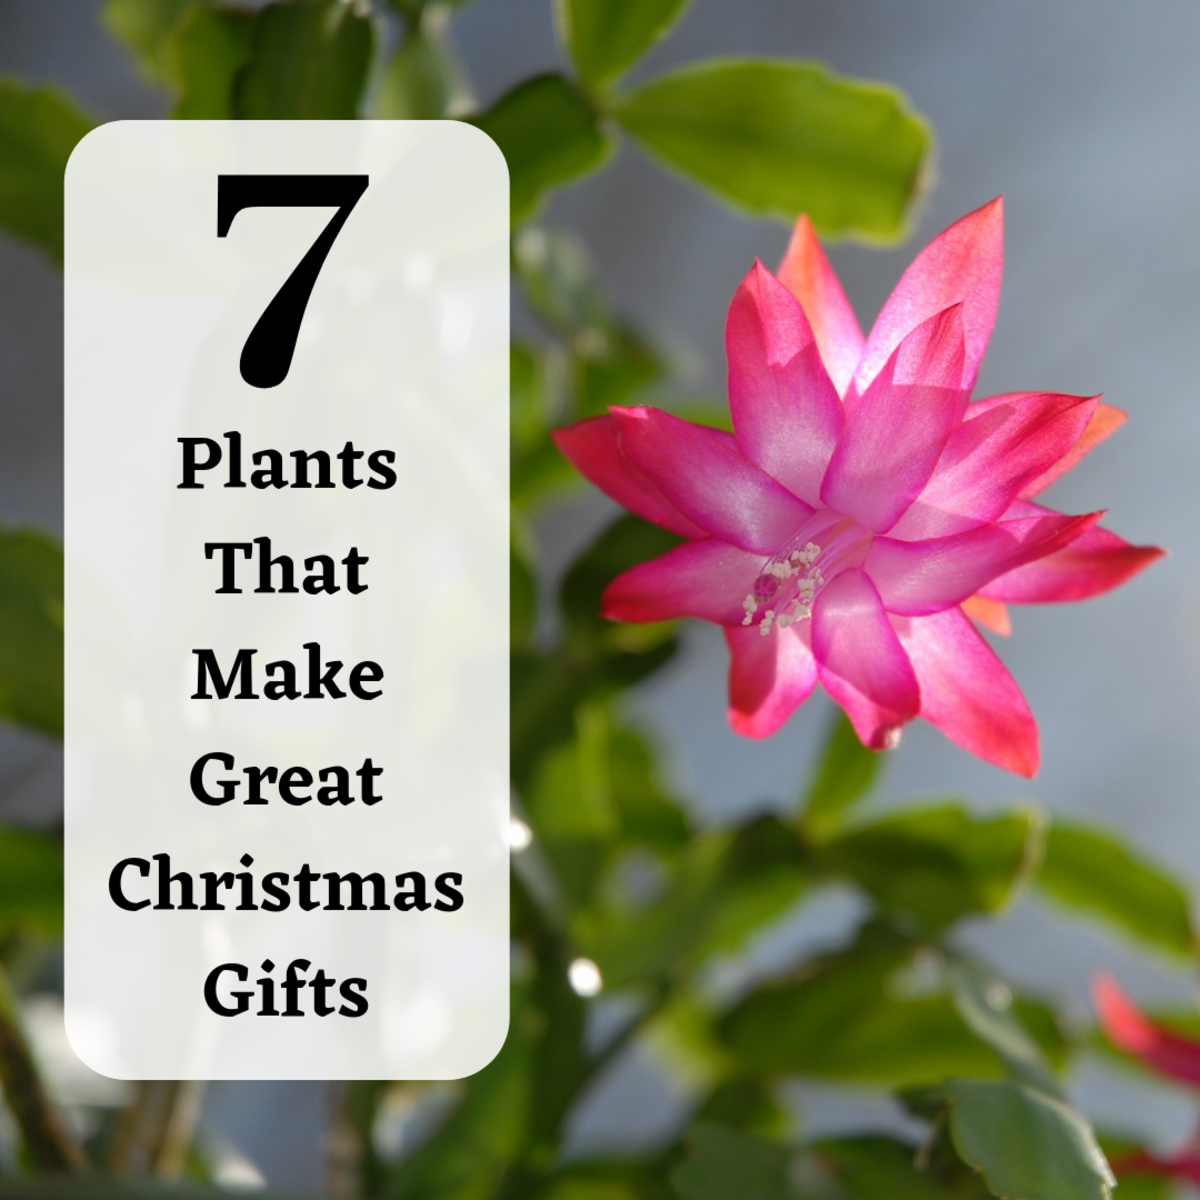 Give a living gift this Christmas with a beautiful holiday plant.